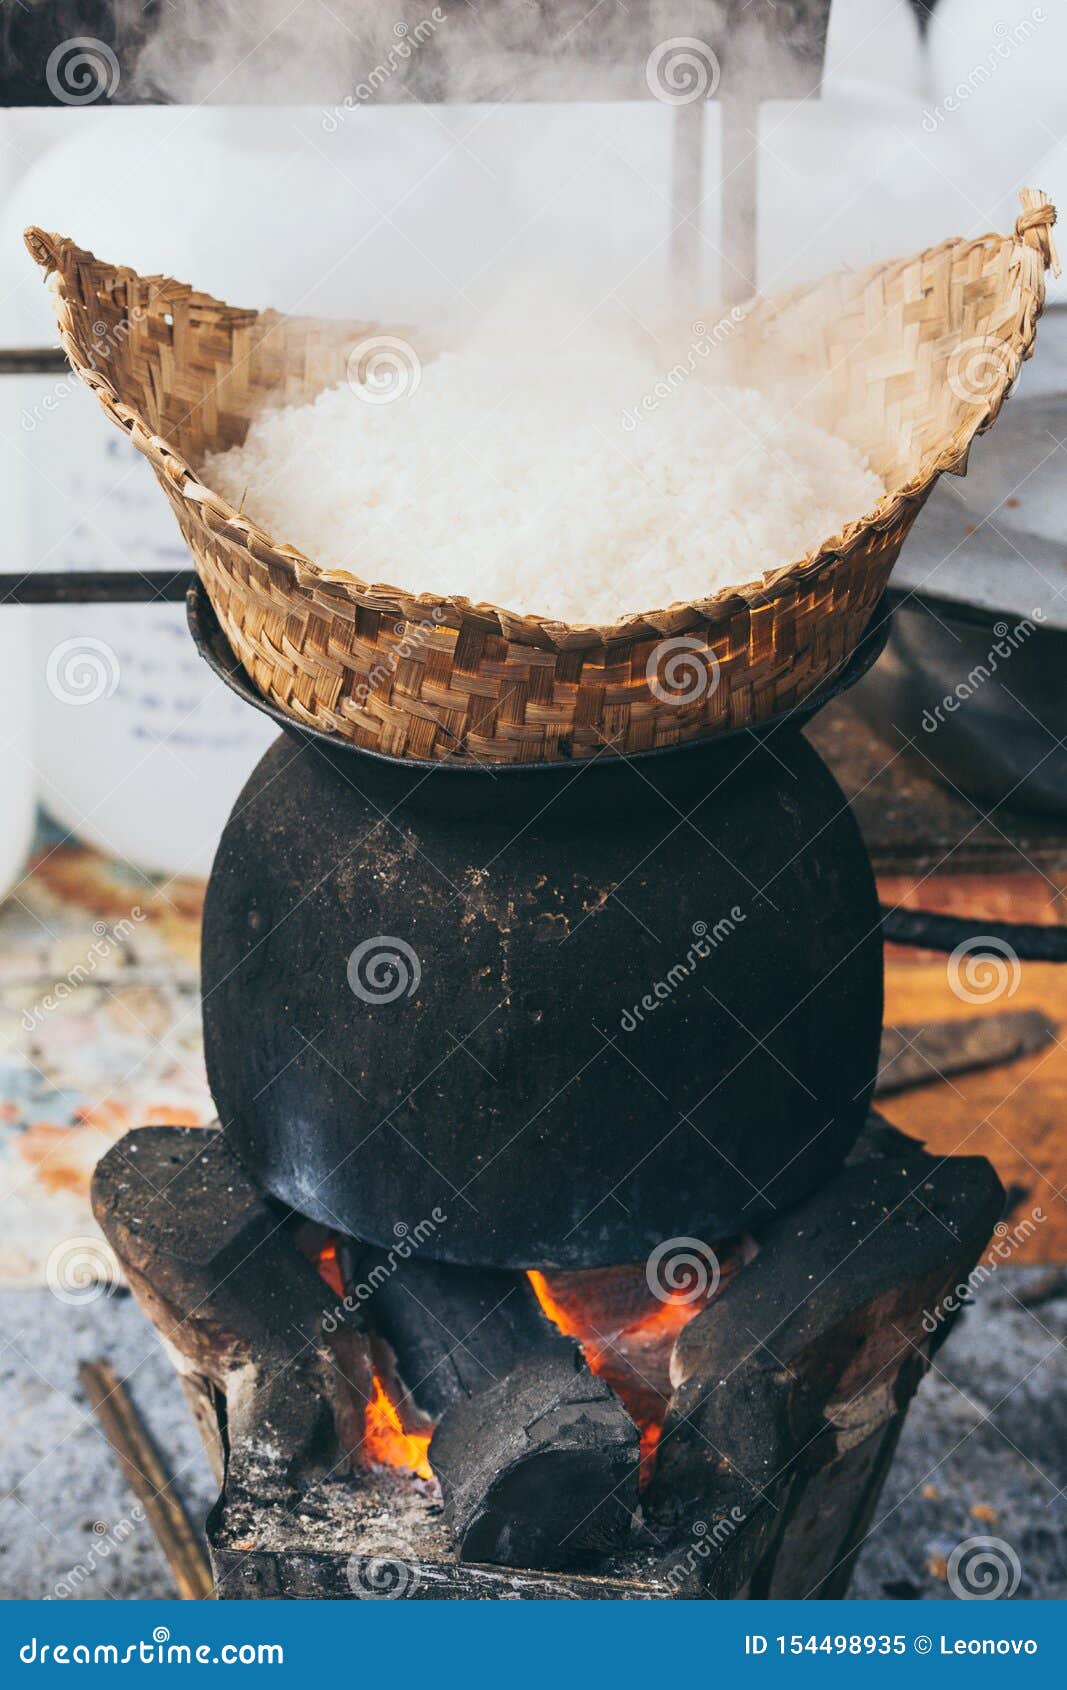 916 Wood Stove Asia Photos Free Royalty Free Stock Photos From Dreamstime